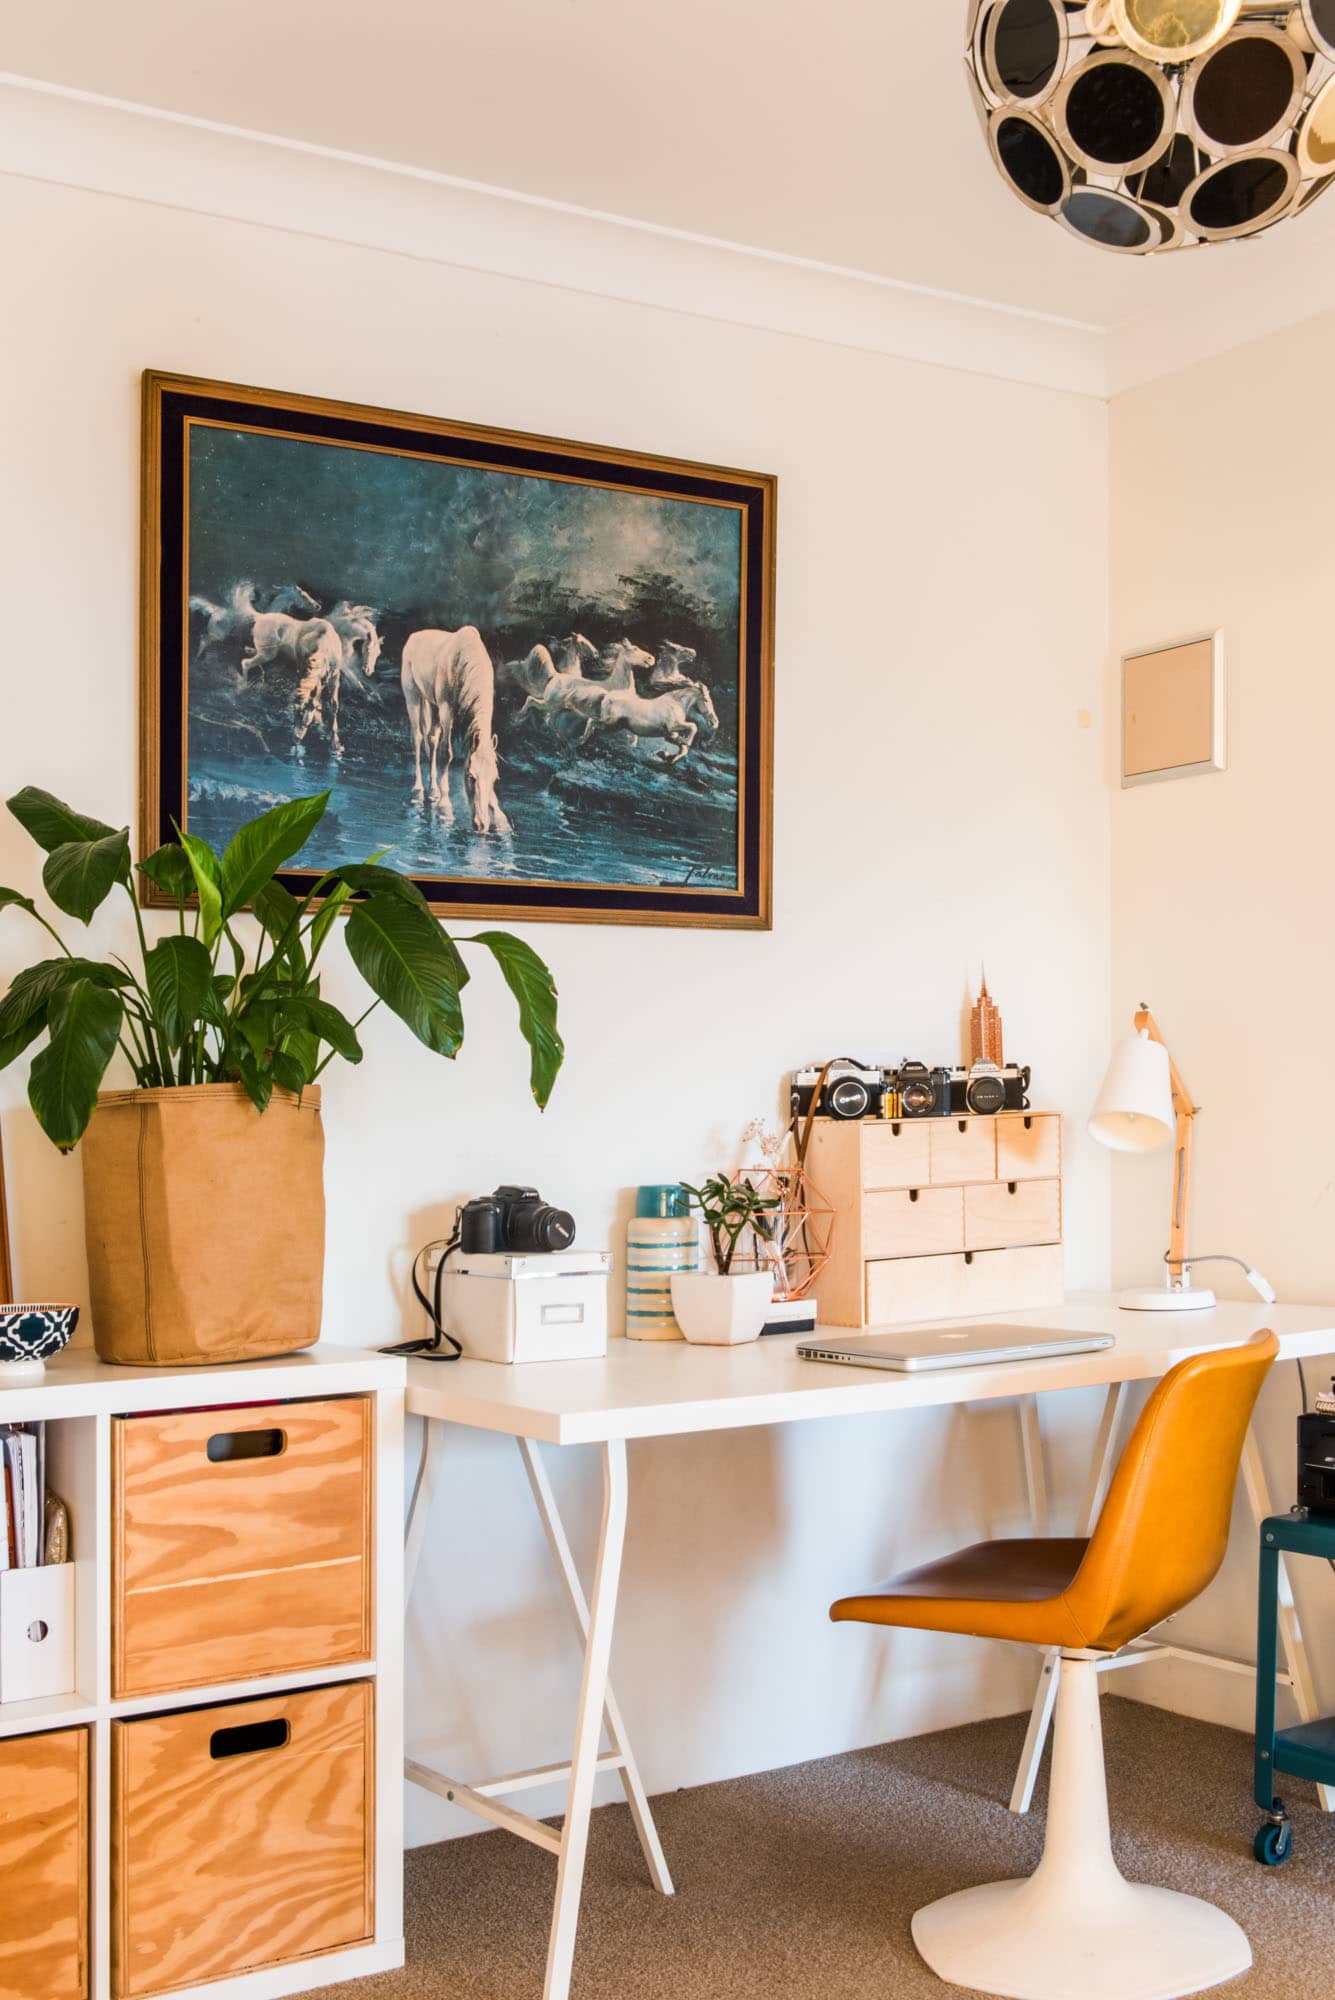 WFH? We asked our team about their most effective home office